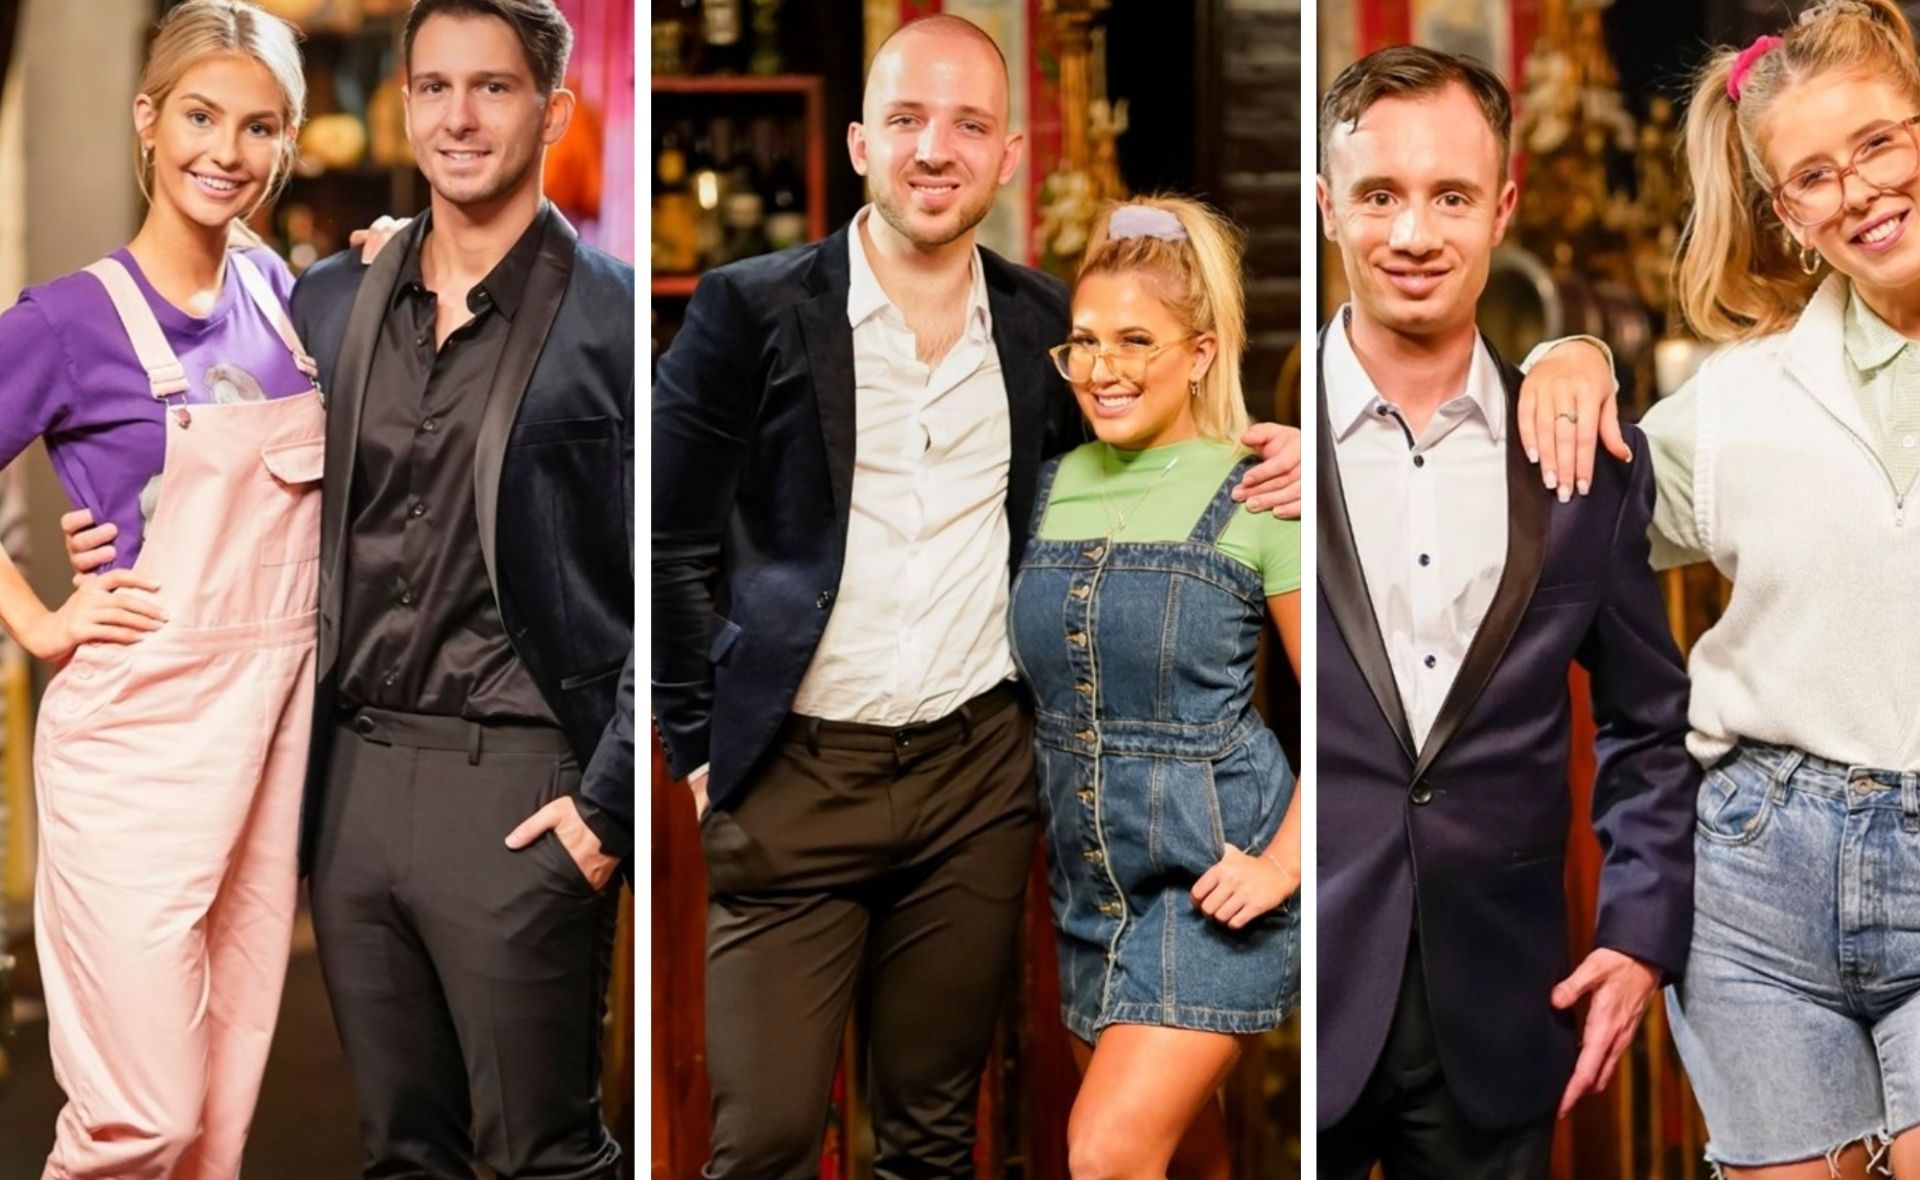 As the competition heats up Beauty and the Geek’s final three reveal their secrets